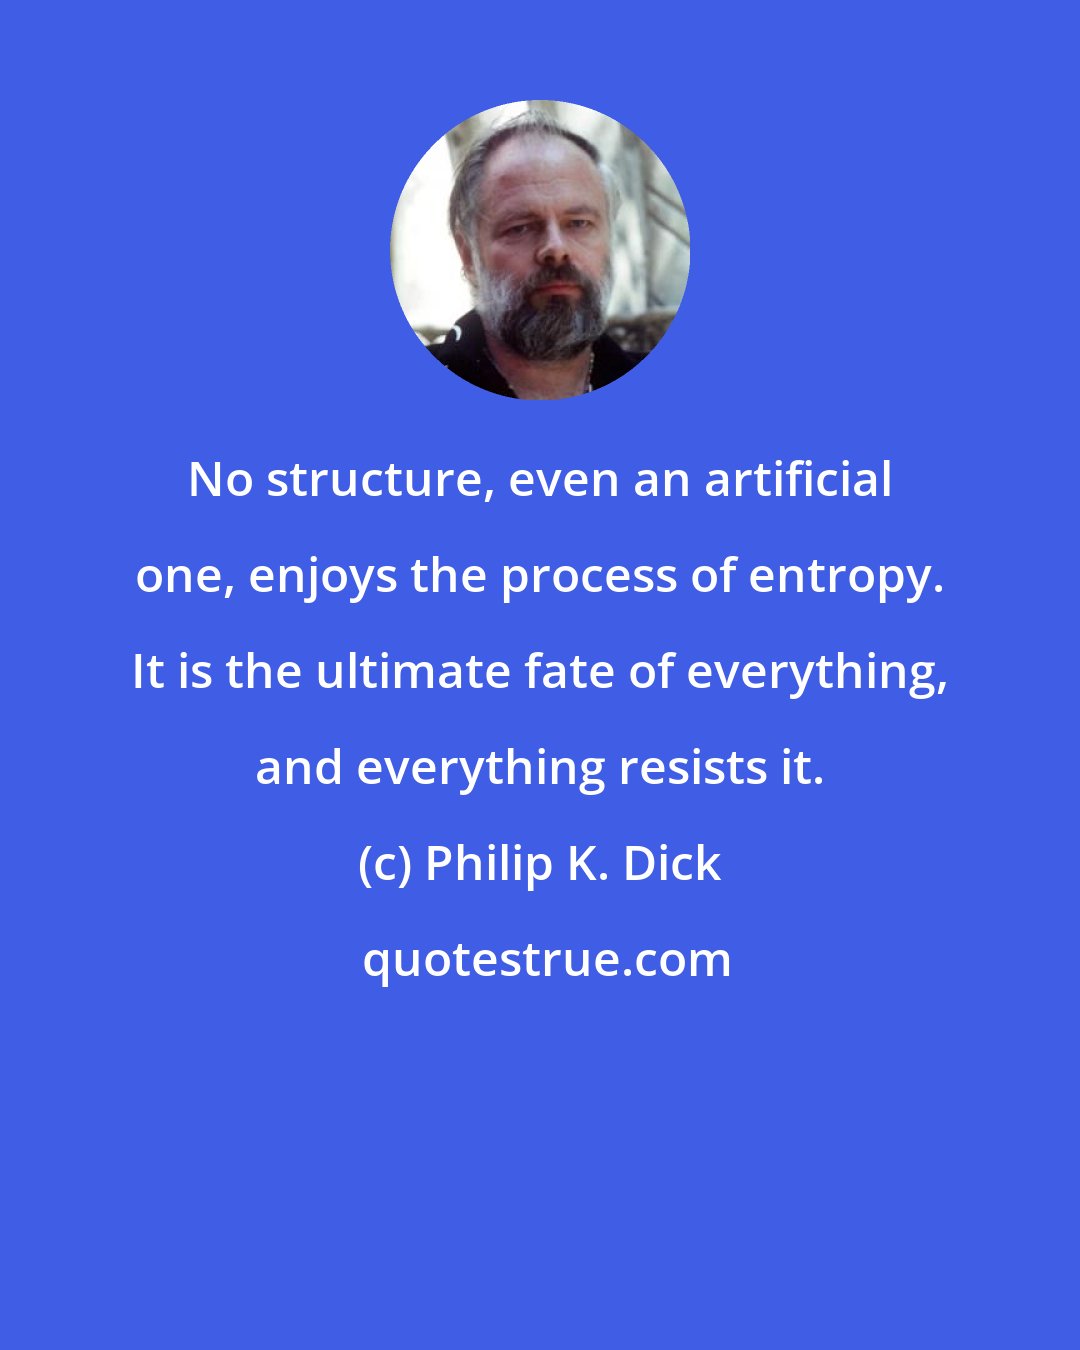 Philip K. Dick: No structure, even an artificial one, enjoys the process of entropy. It is the ultimate fate of everything, and everything resists it.